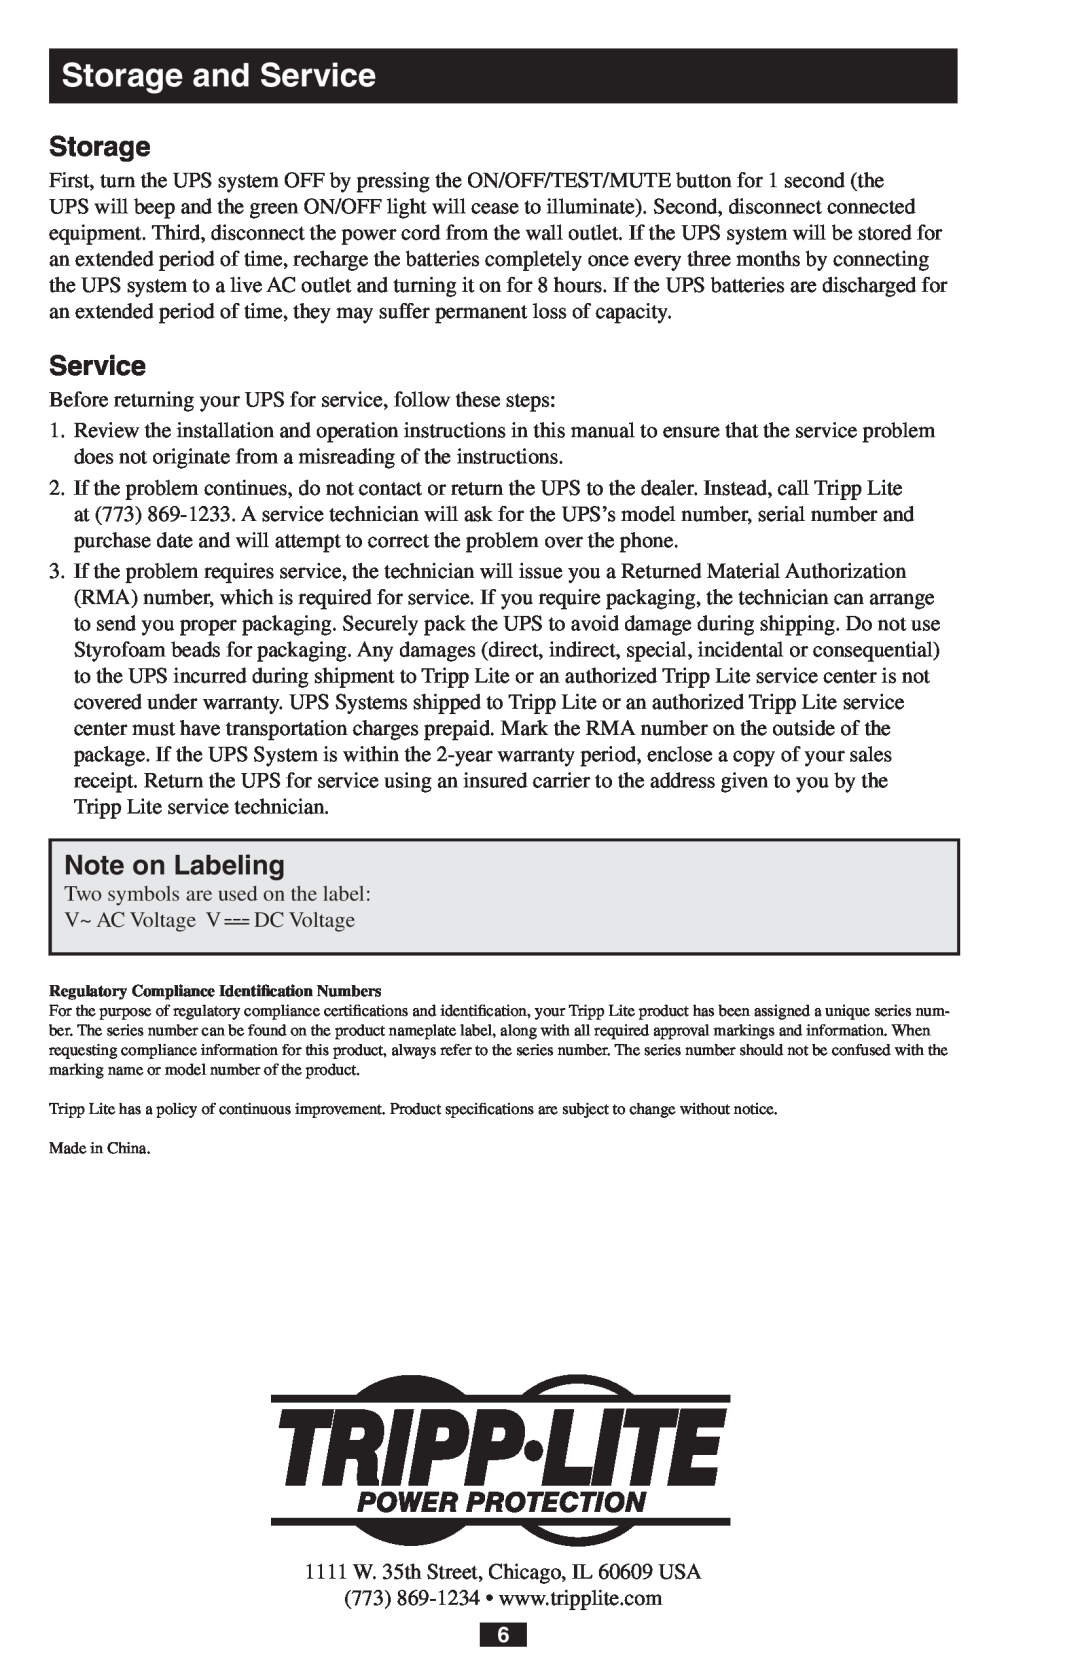 Tripp Lite PRO550 owner manual Storage and Service, Note on Labeling 